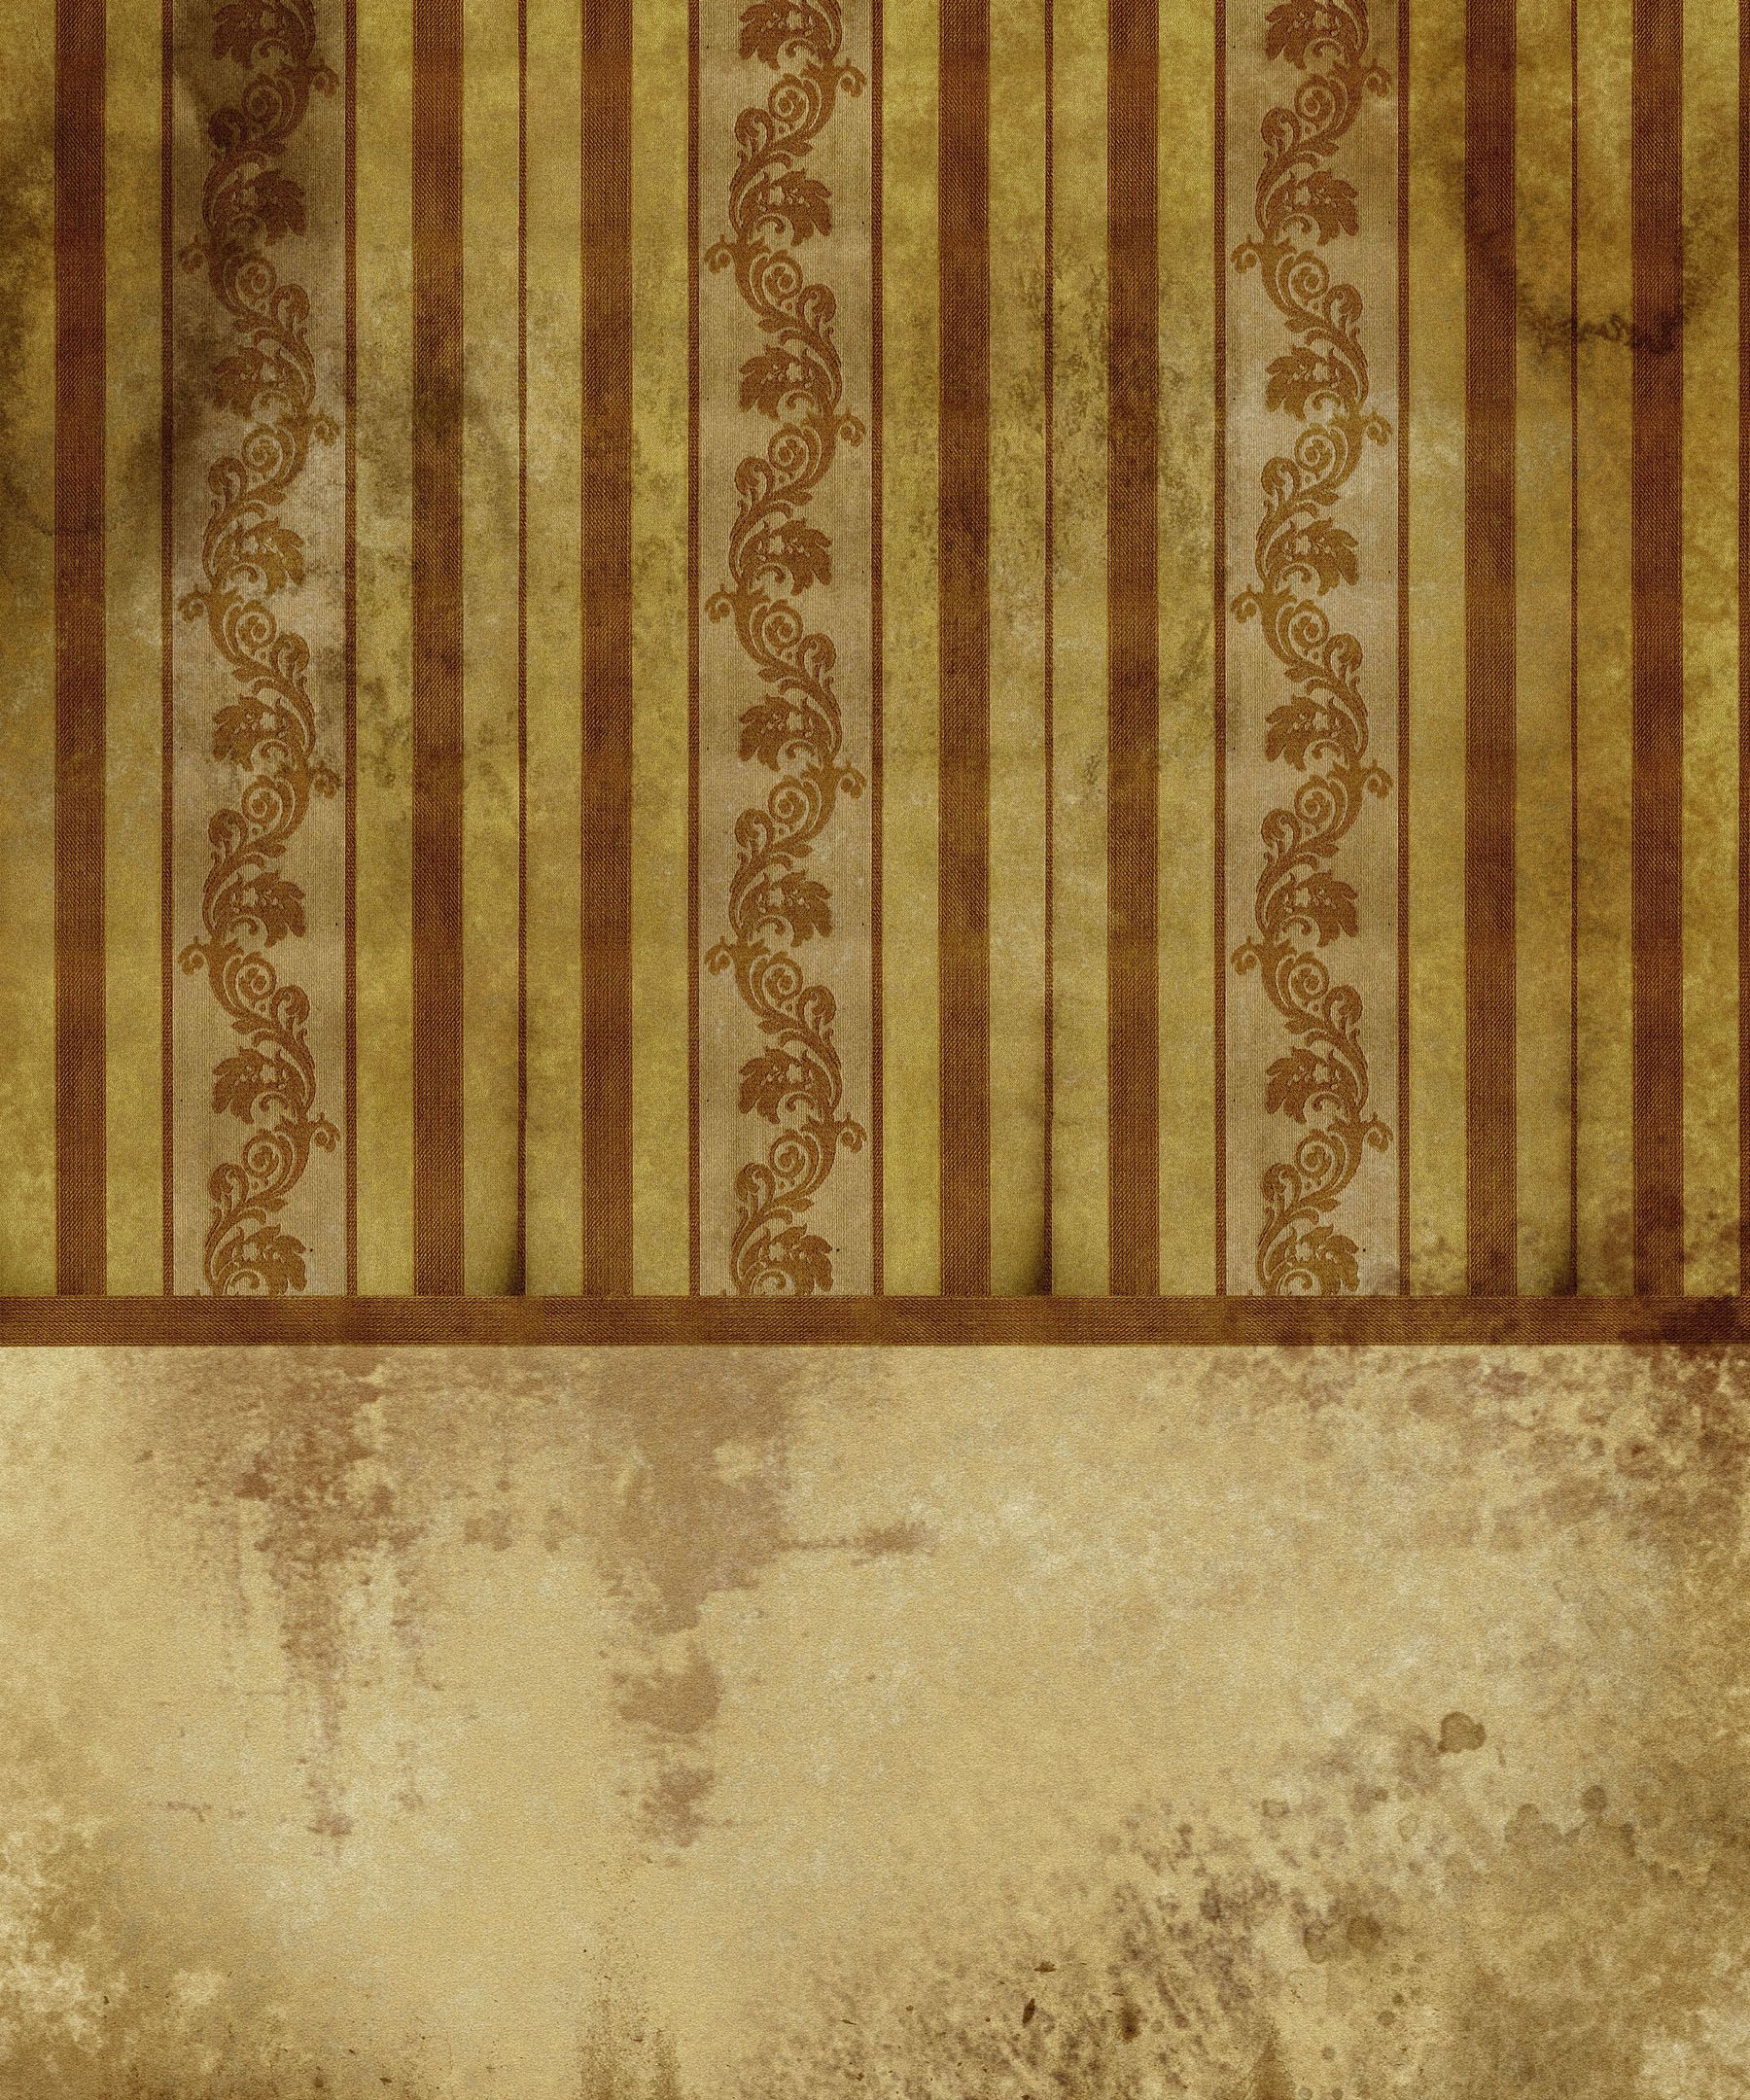 Old European-style wall wallpaper 12280 - Background patterns - Others